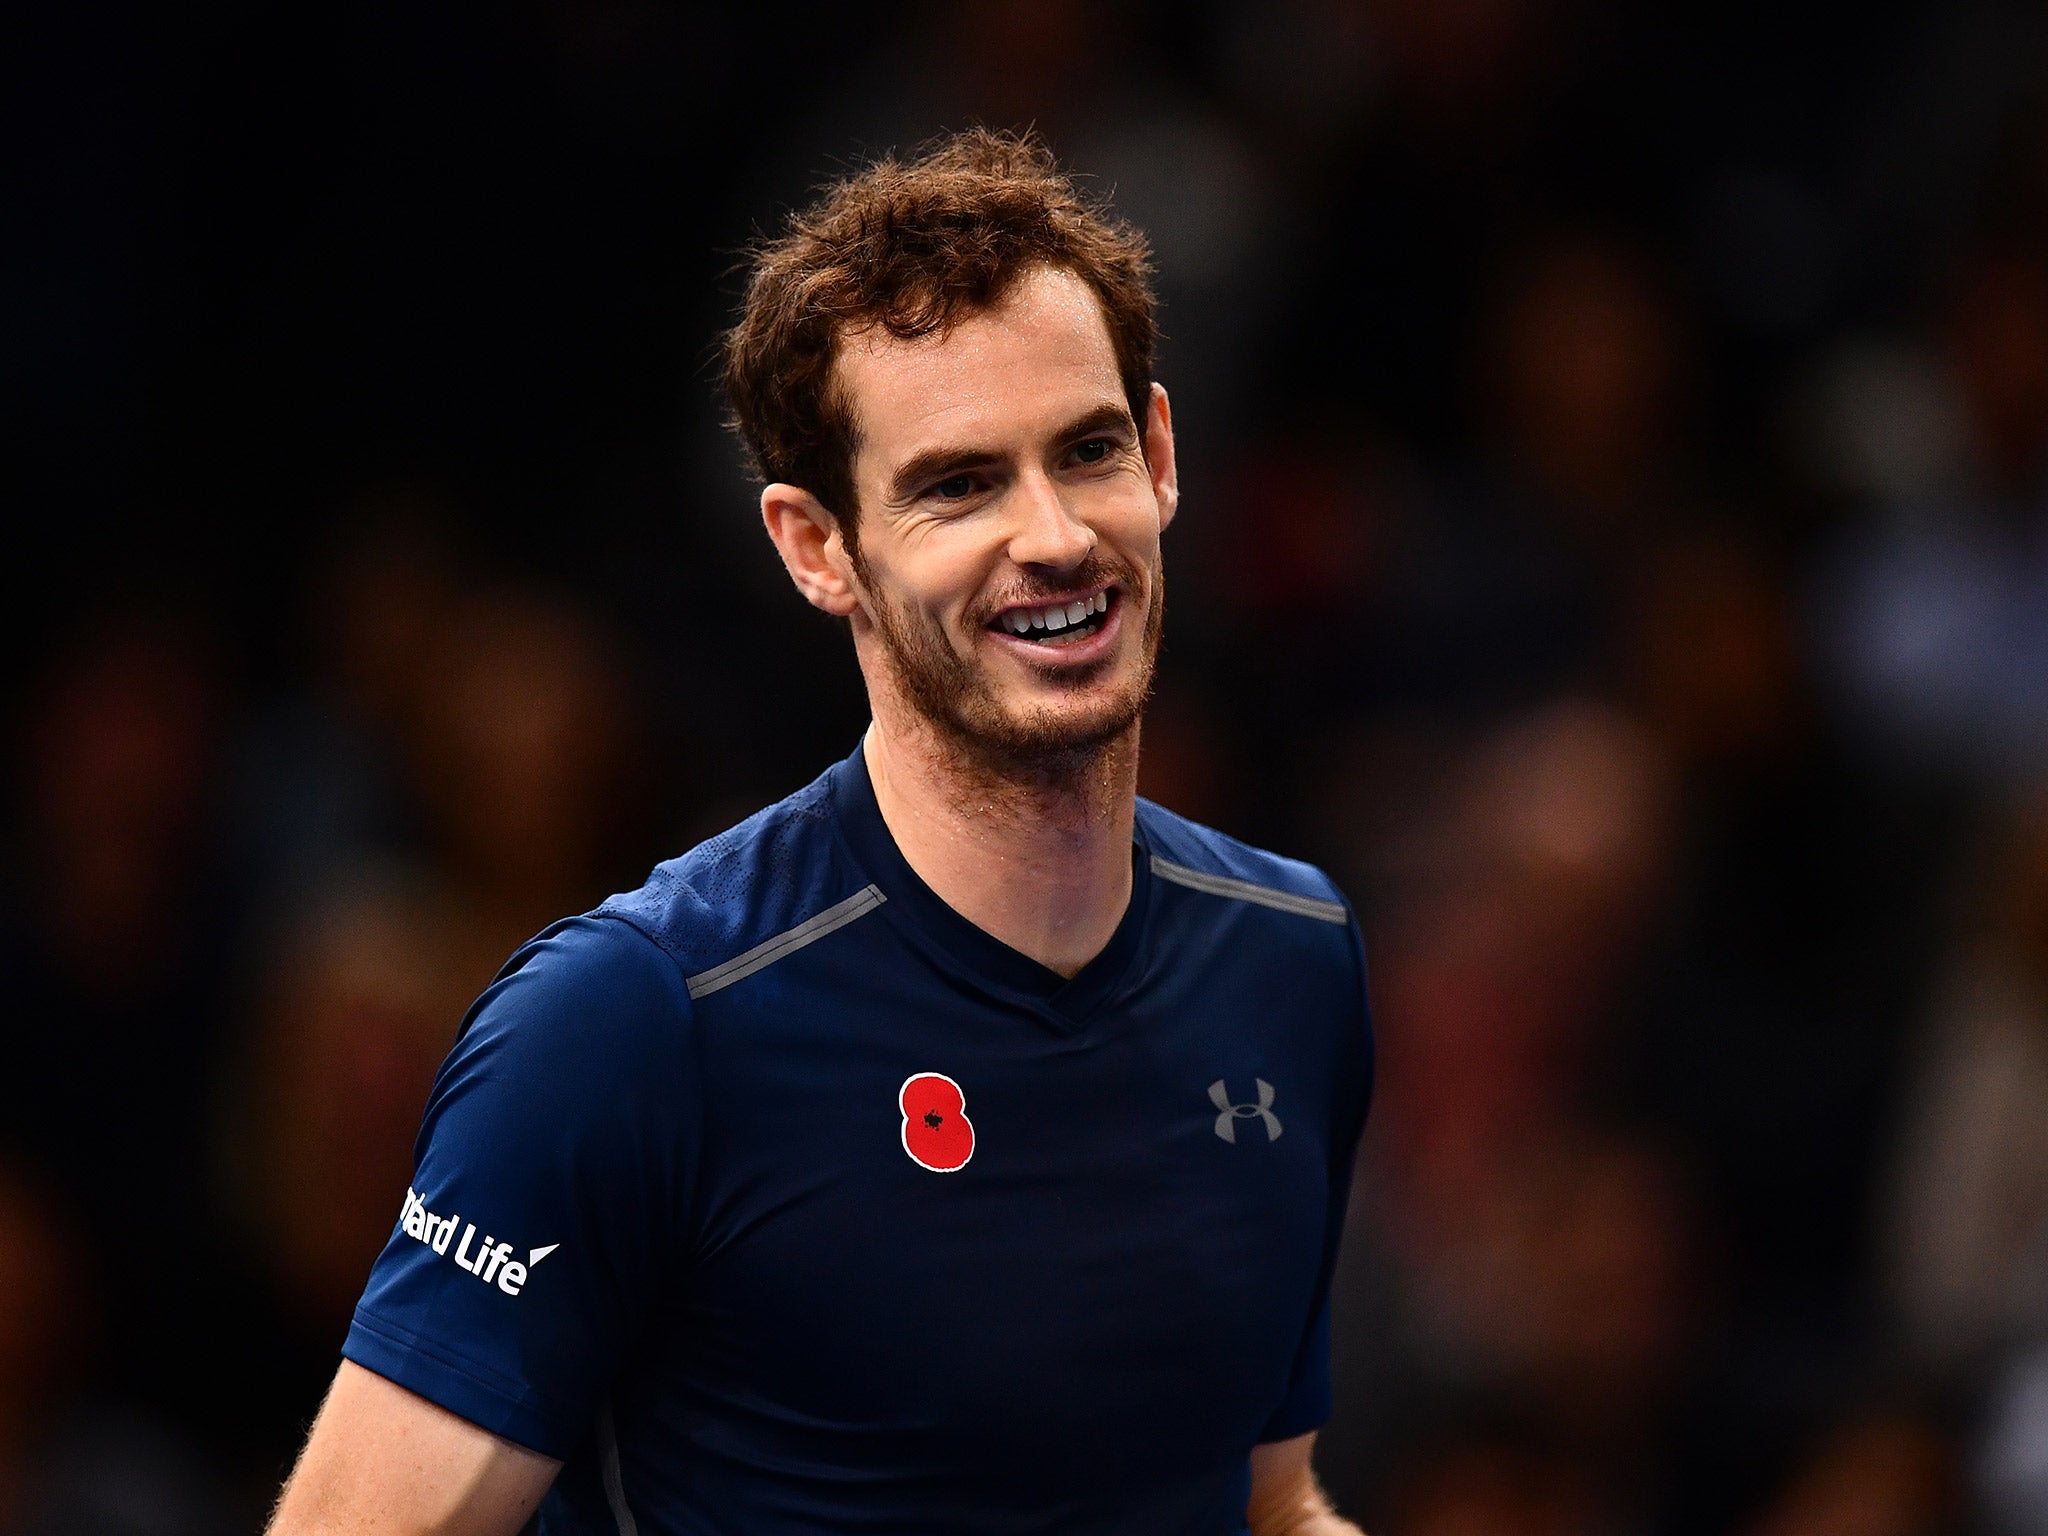 Andy Murray will move up to No 1 when the world rankings are updated on Monday